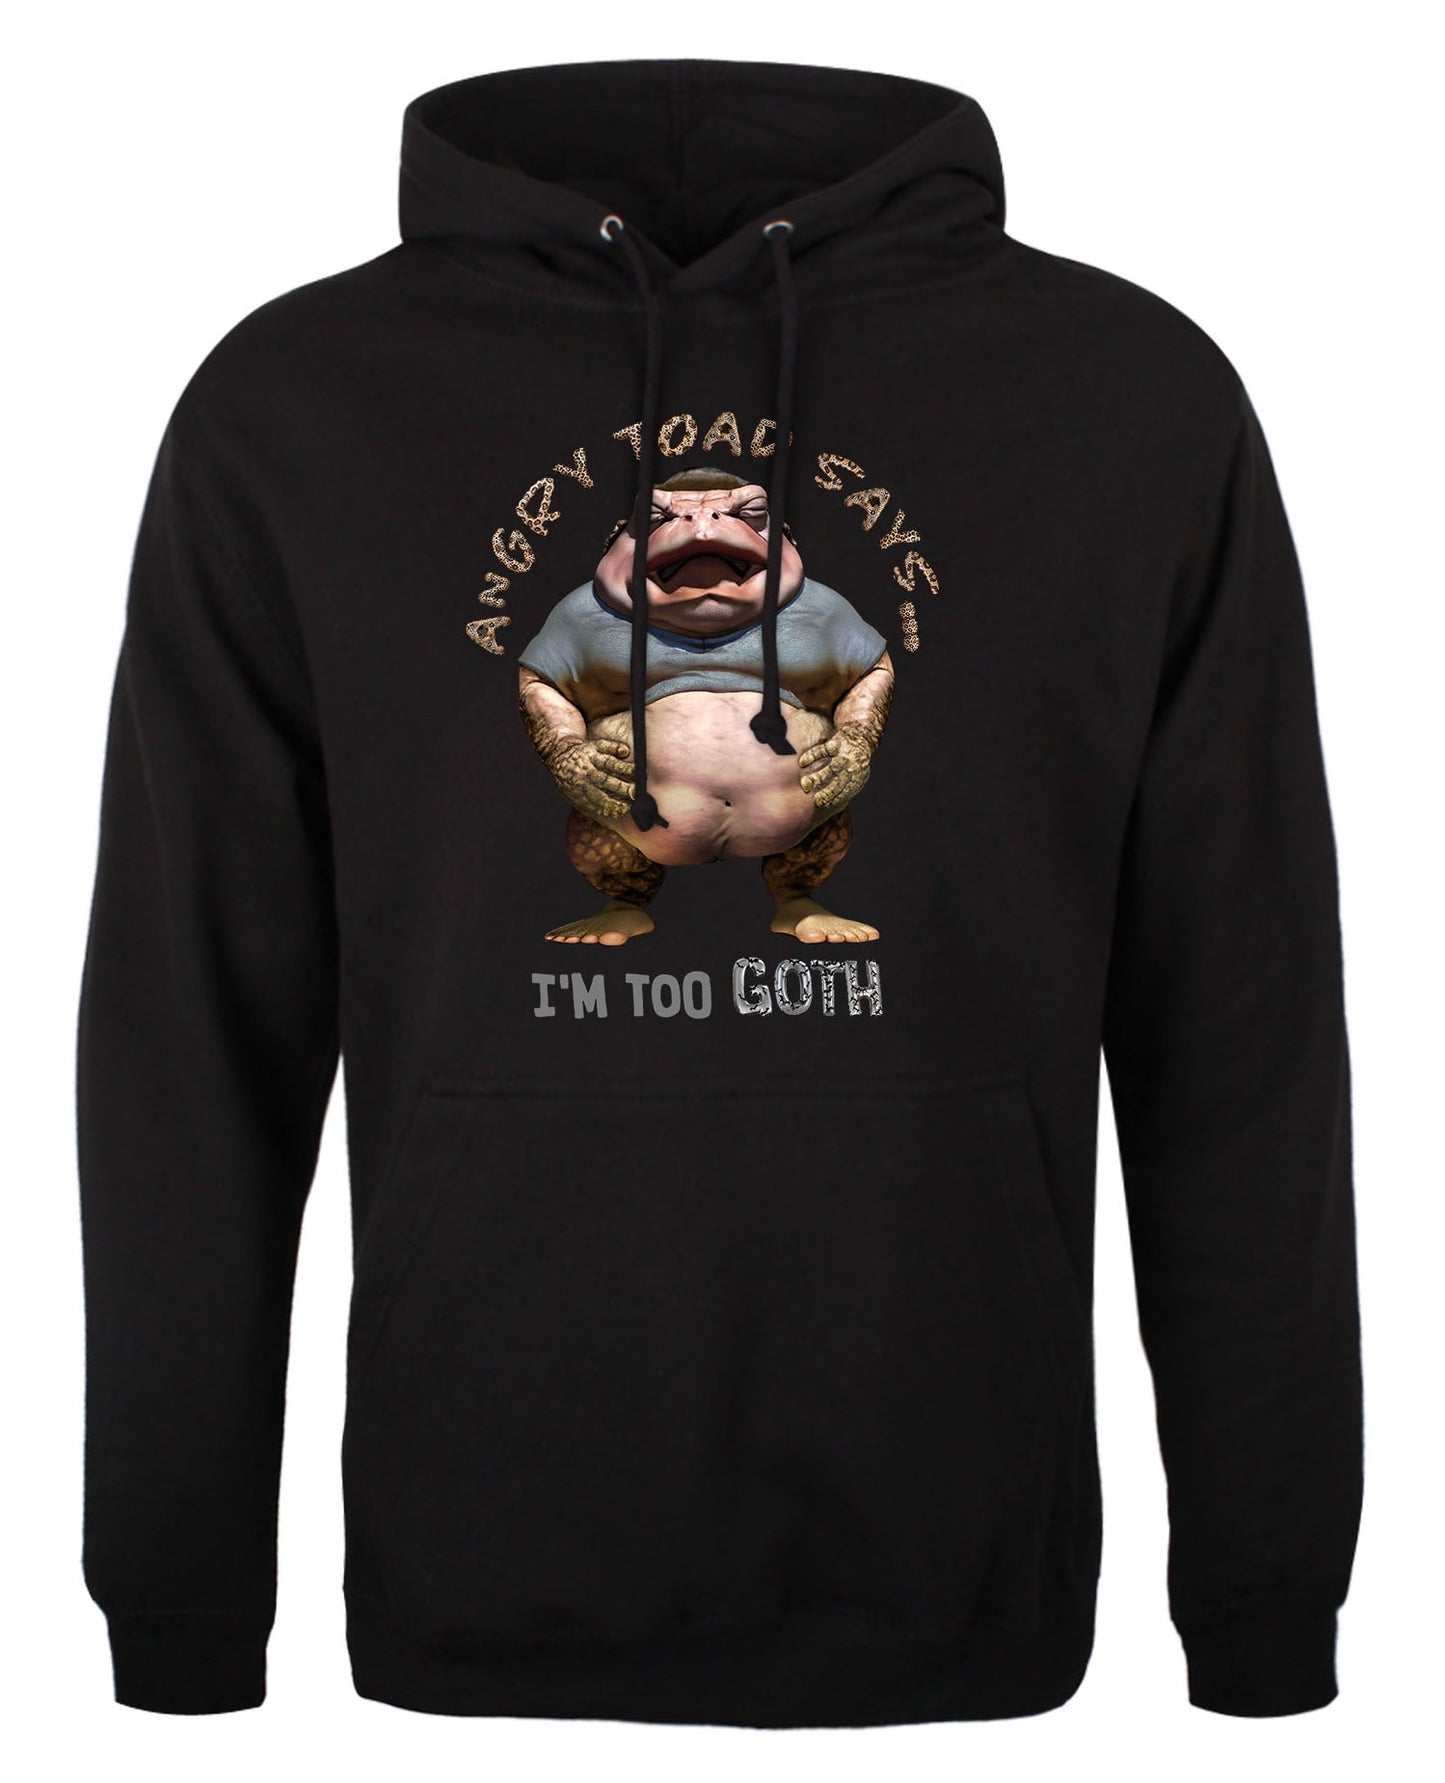 Necessary Evil Angry Toad Says I'm too Goth Unisex Hoodie - Kate's Clothing